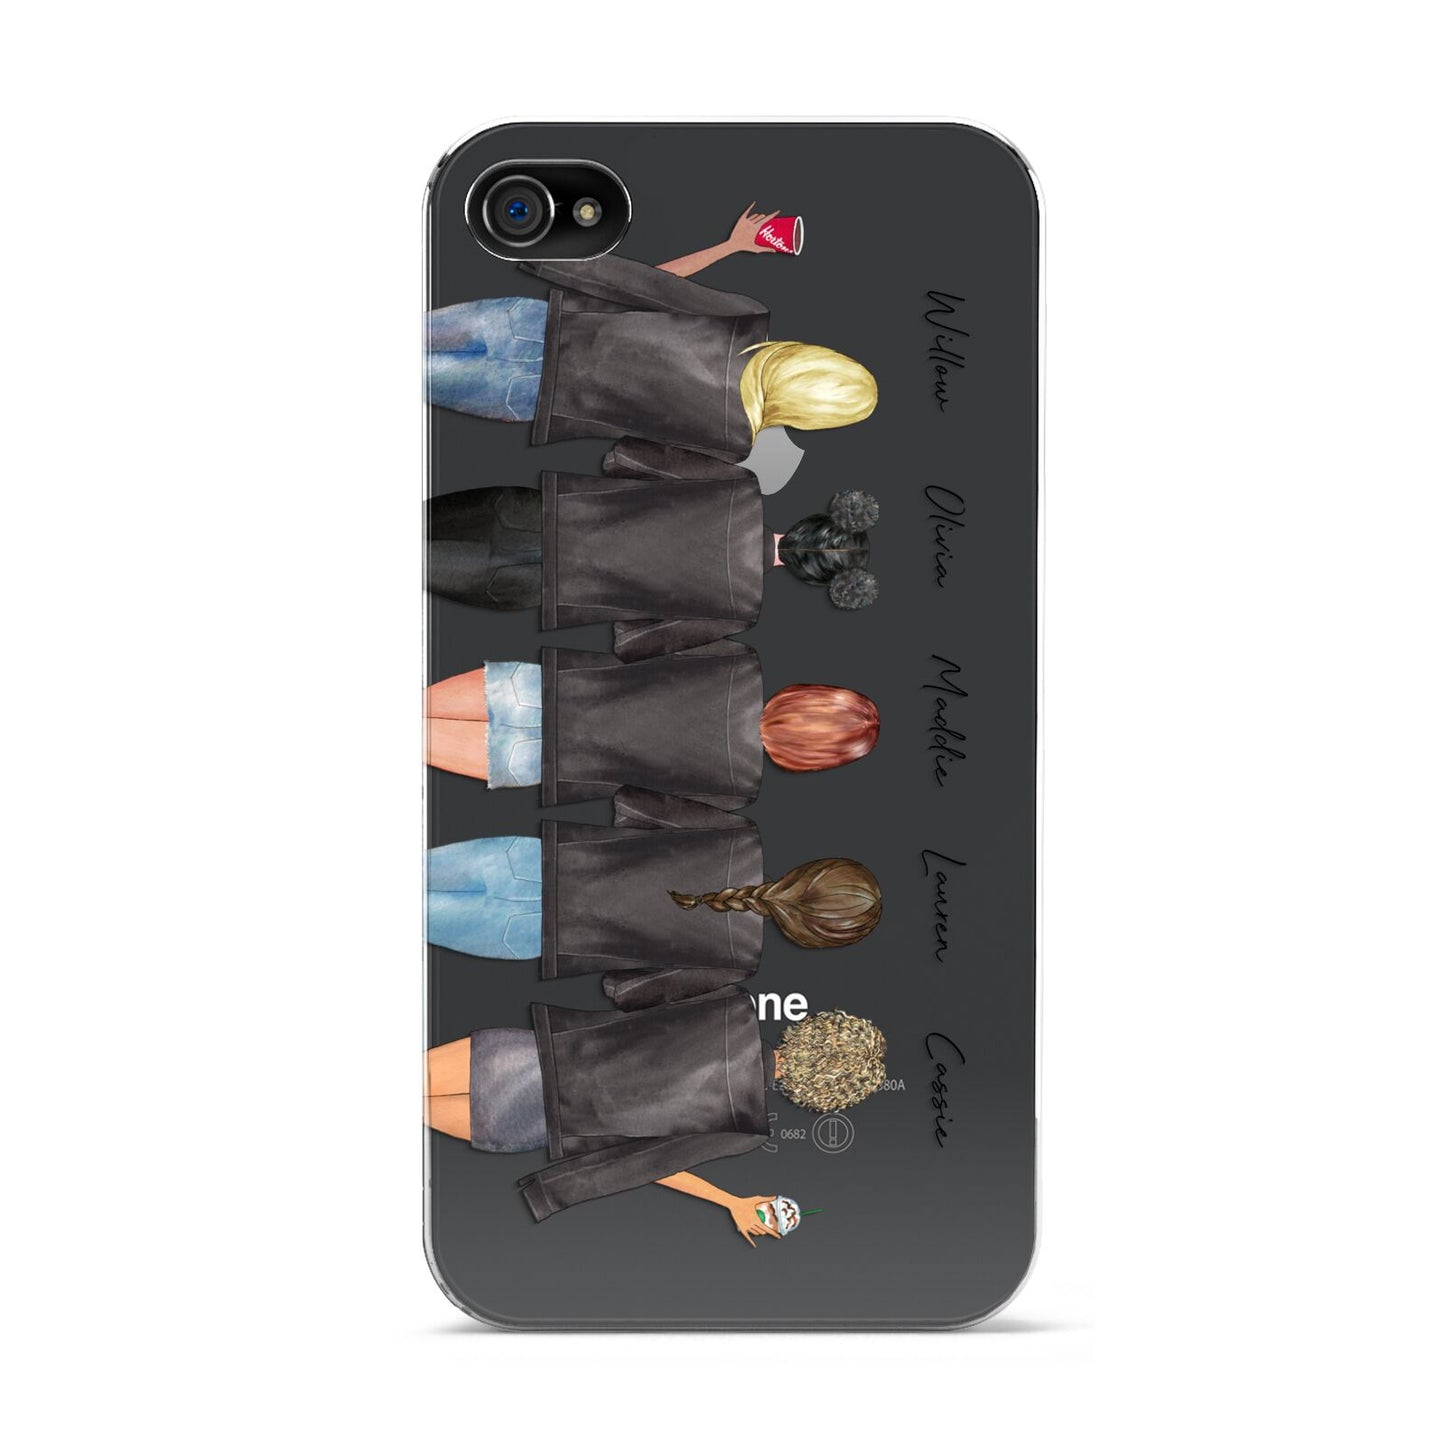 5 Best Friends with Names Apple iPhone 4s Case